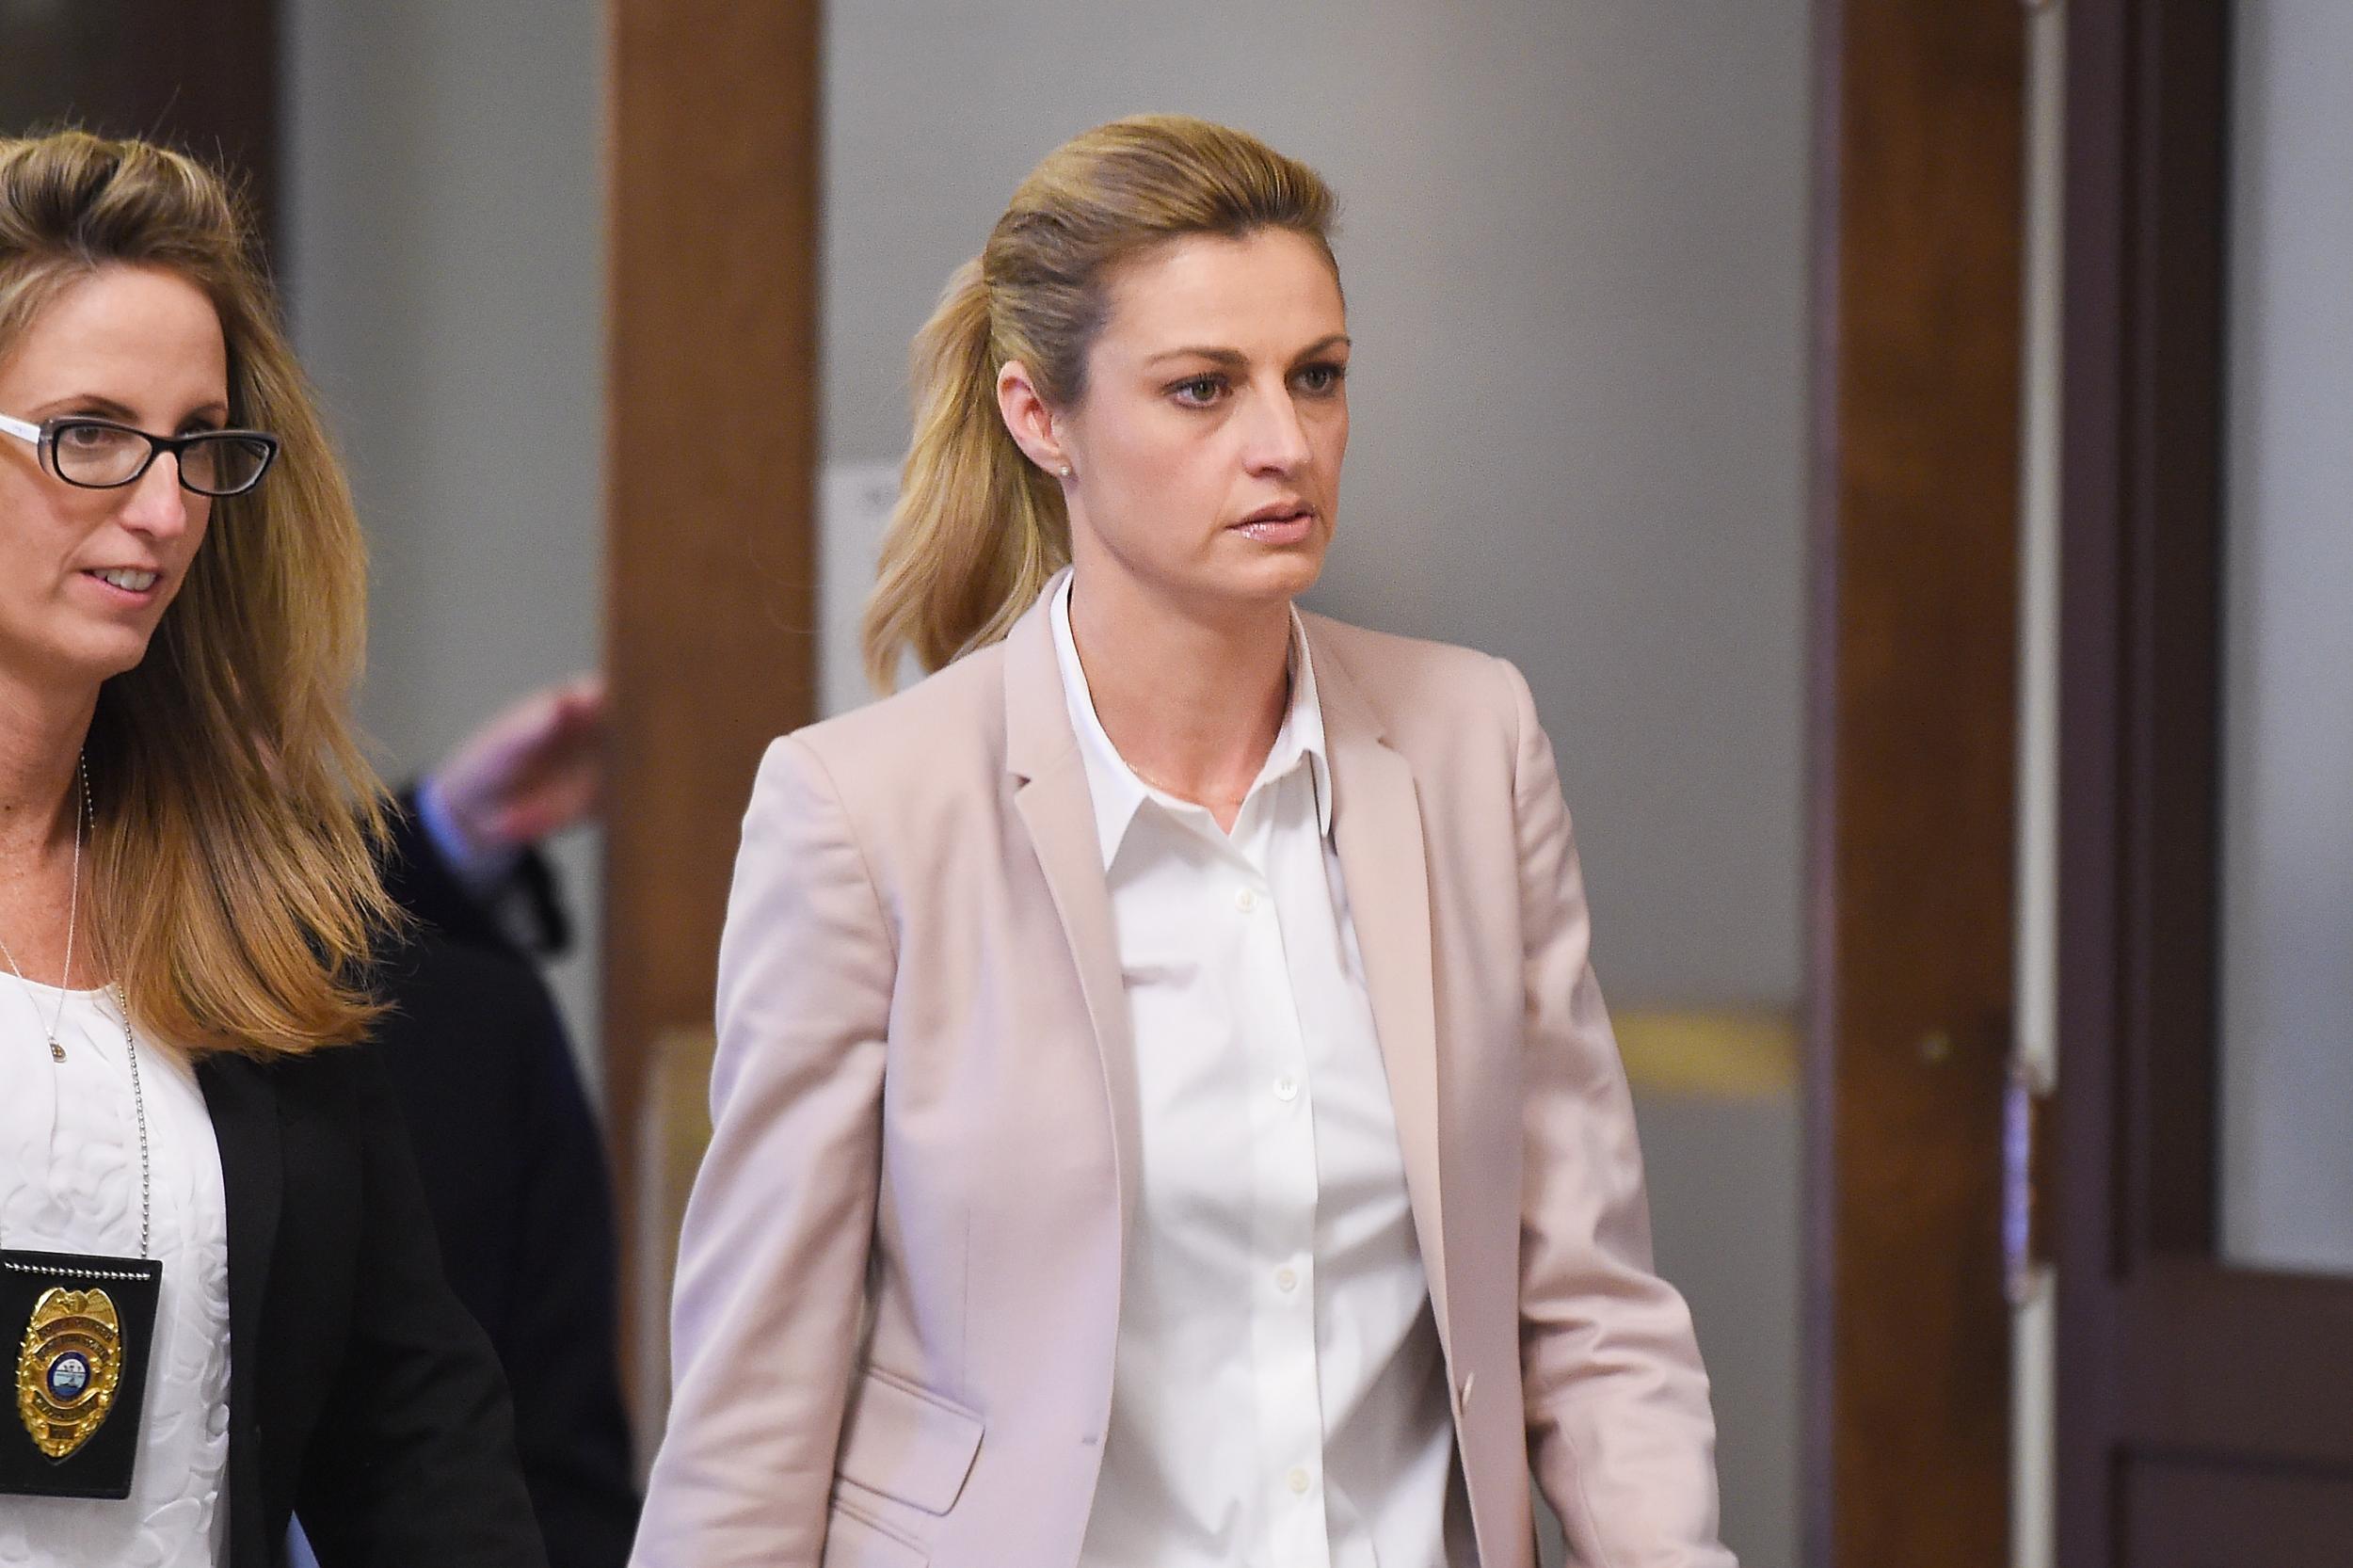 Erin Andrews breaks down during testimony about nude videos of her secretly shot by stalker in hotel The Independent The Independent pic